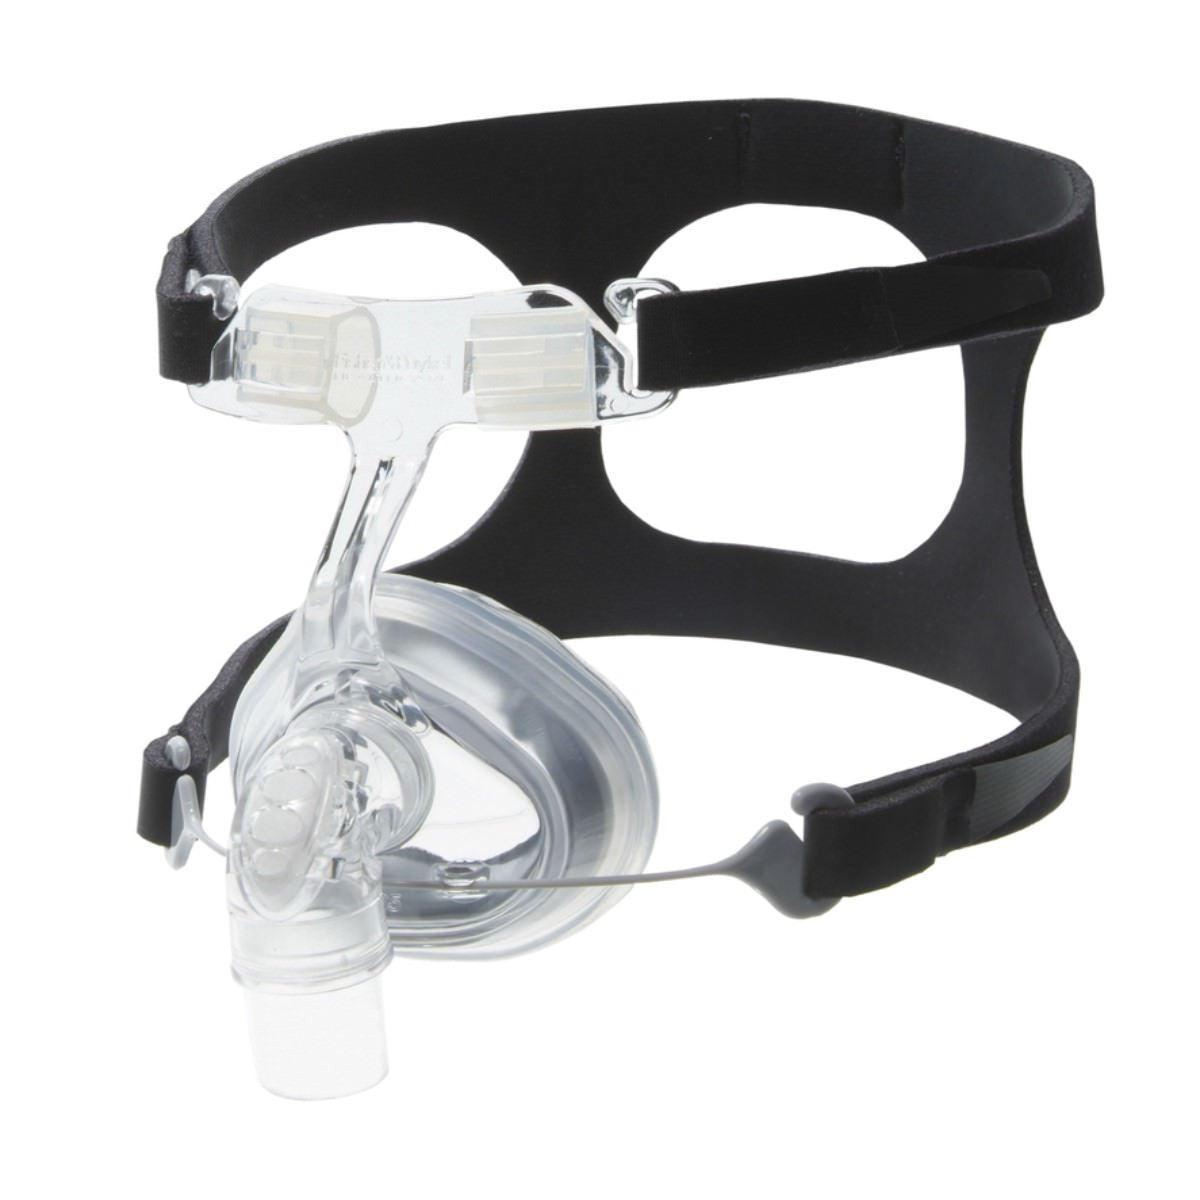 Fisher & Paykel FlexiFit 405 Nasal Mask System with Headgear